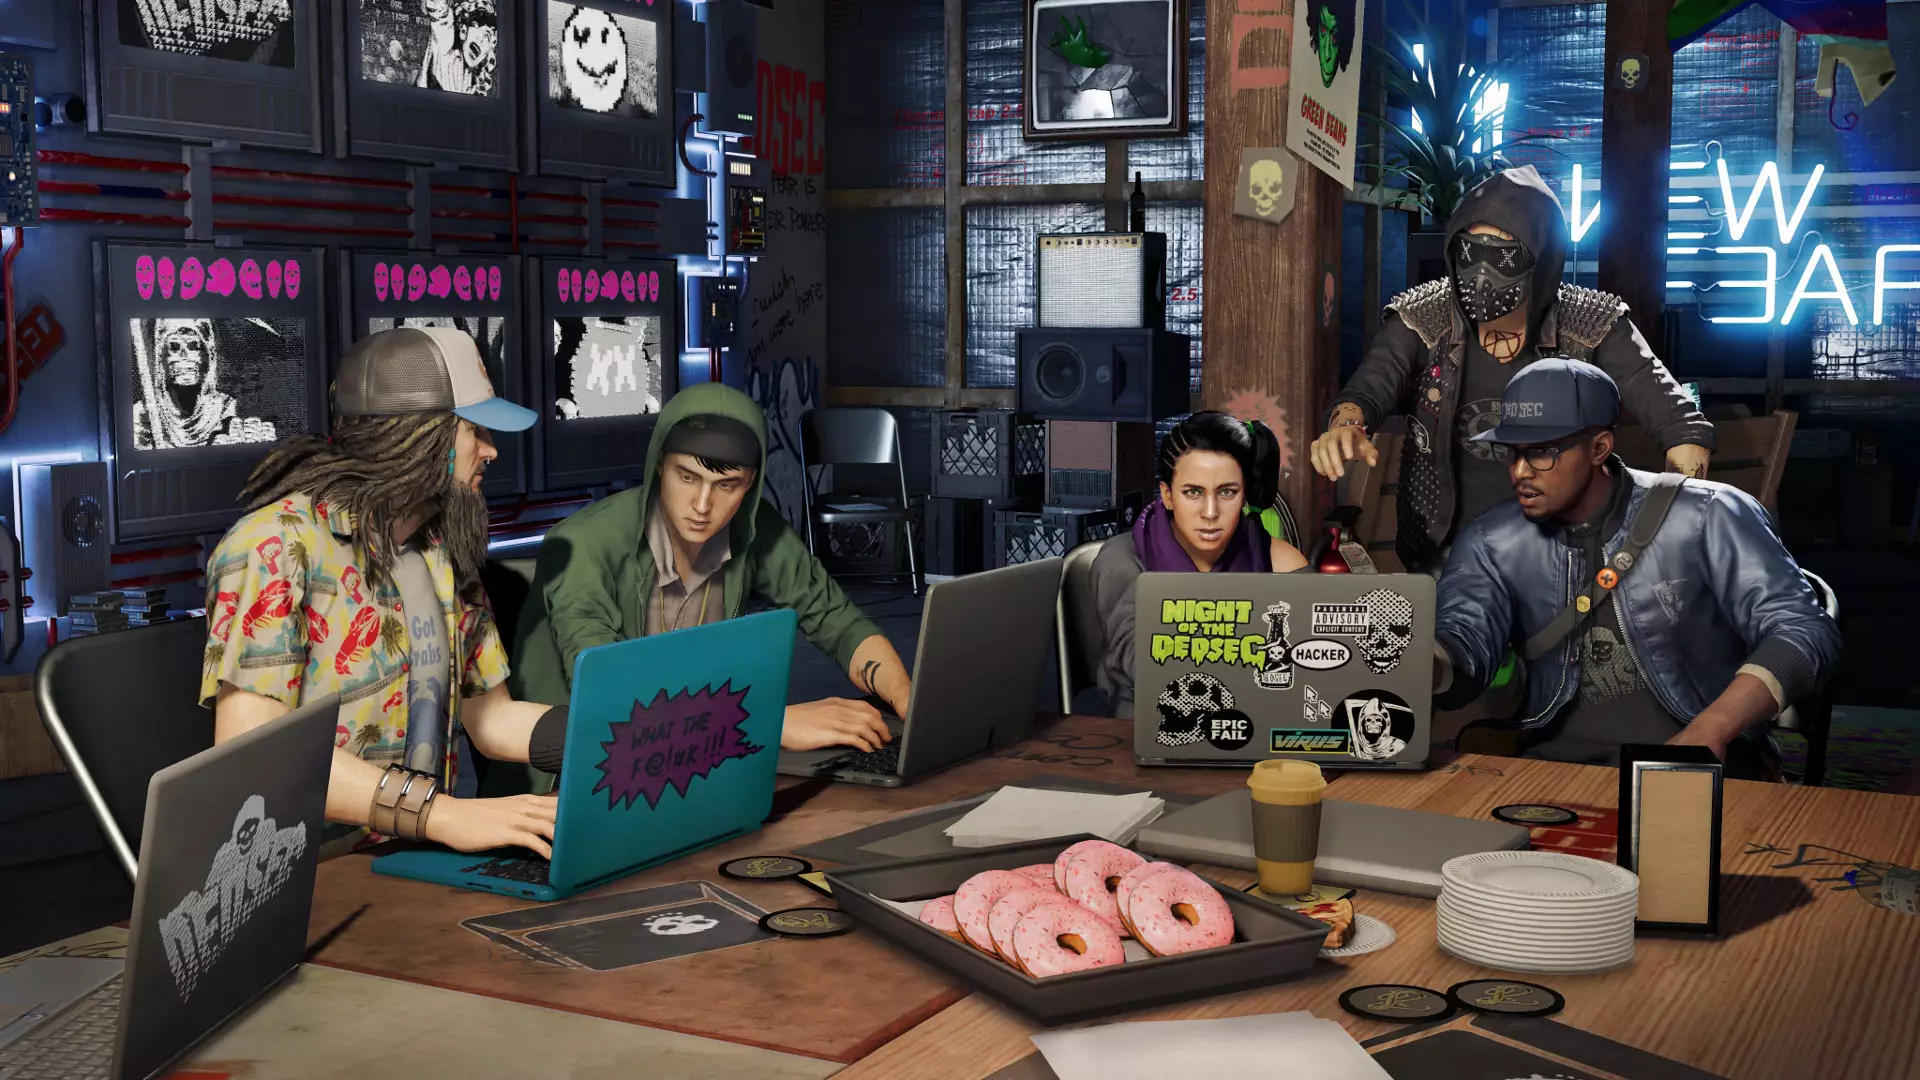 Some hackers, hacking, in 2016's Watch Dogs 2 /